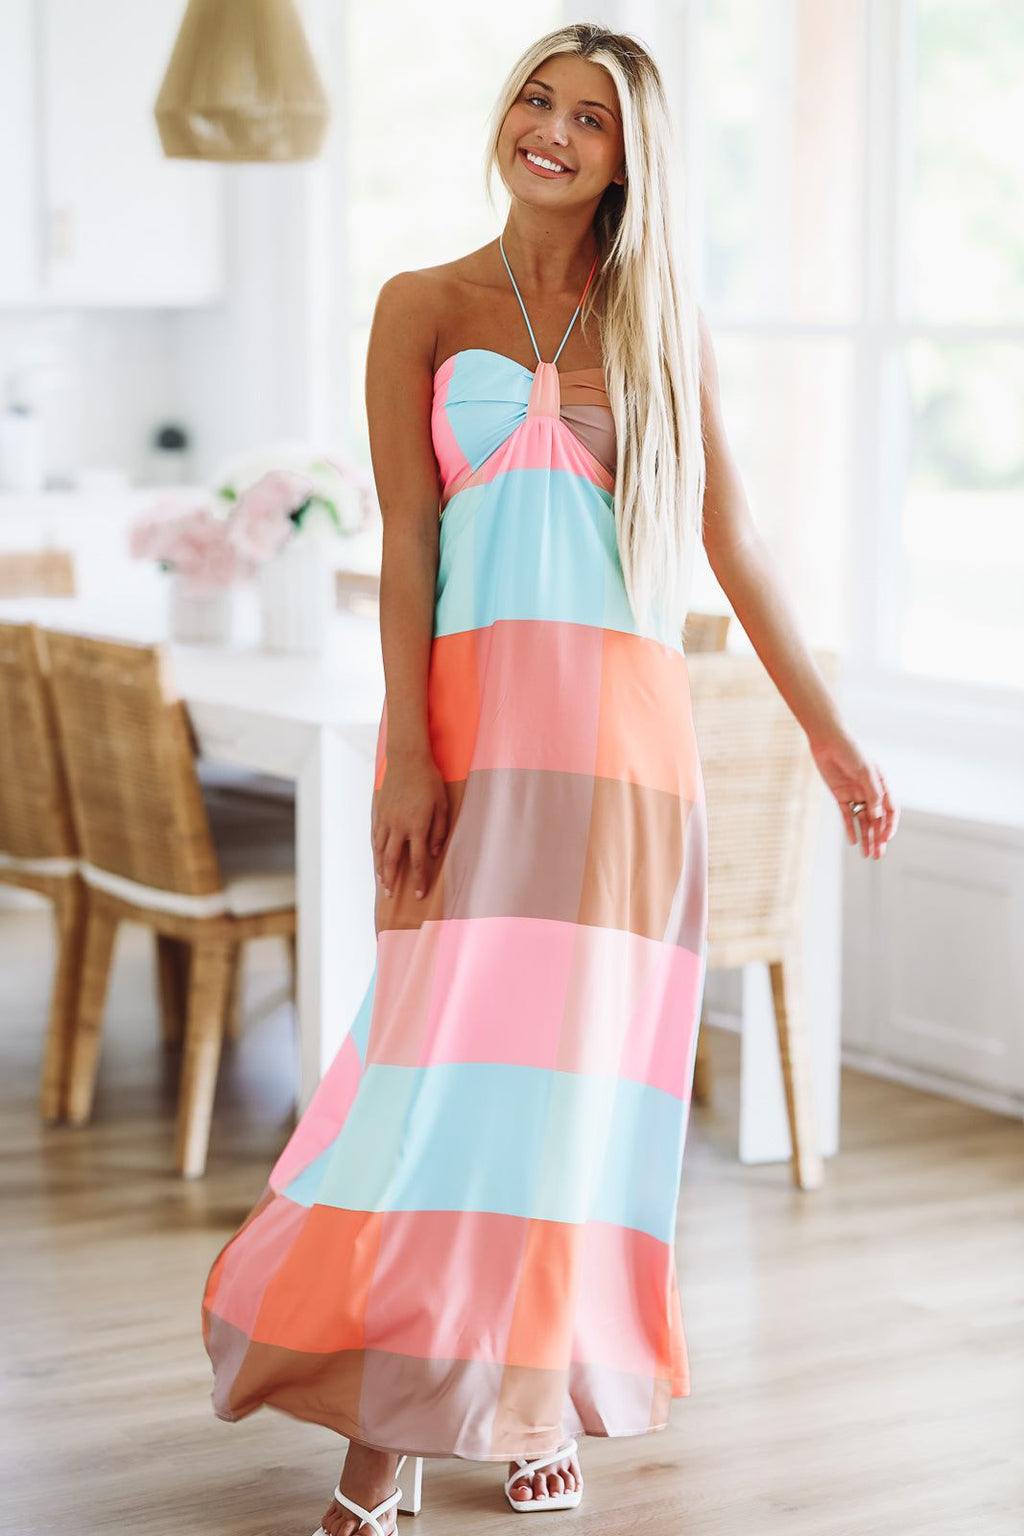 HAZEL & OLIVE Don't Be a Square Max Dress - Pink, Peach, Blue and Mint